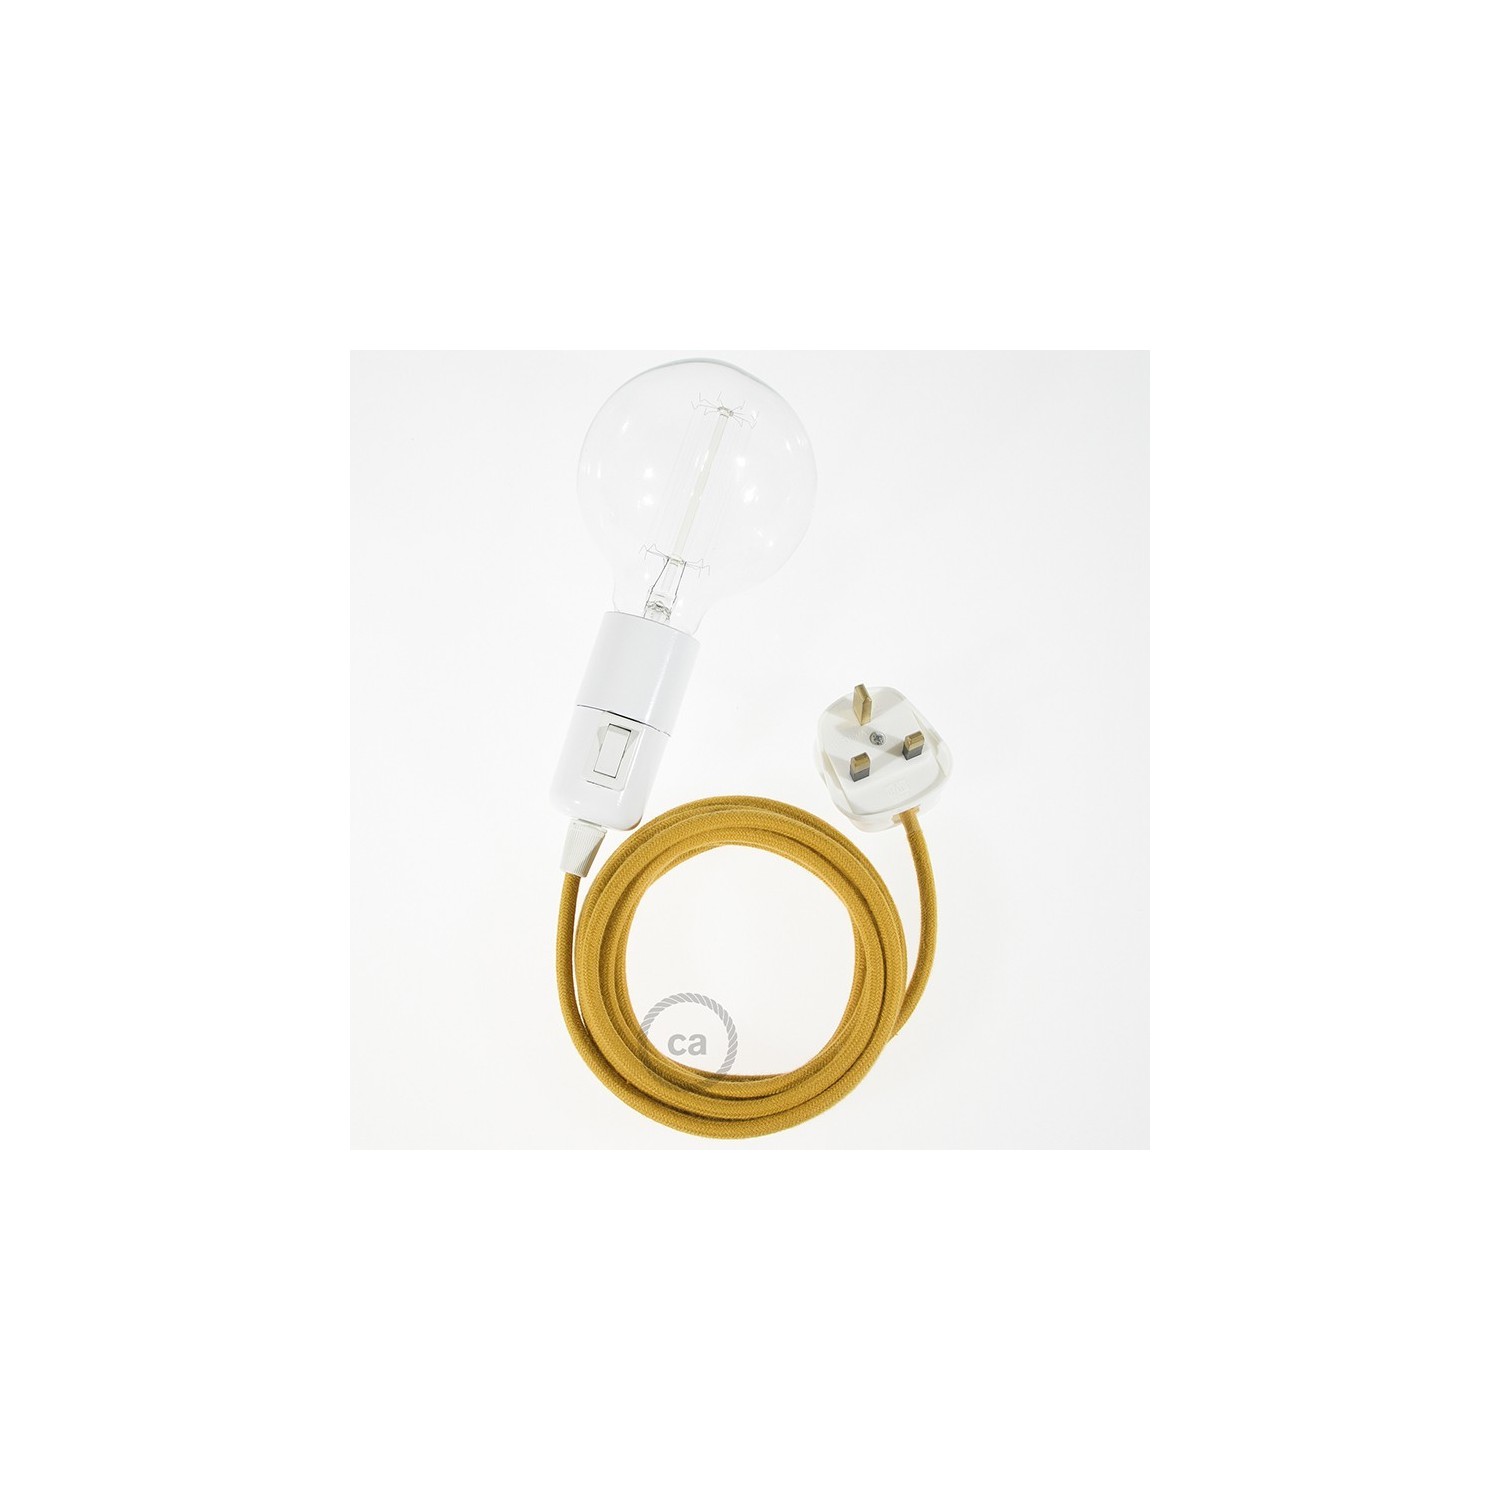 Create your RC31 Golden Honey Cotton Snake and bring the light wherever you want.